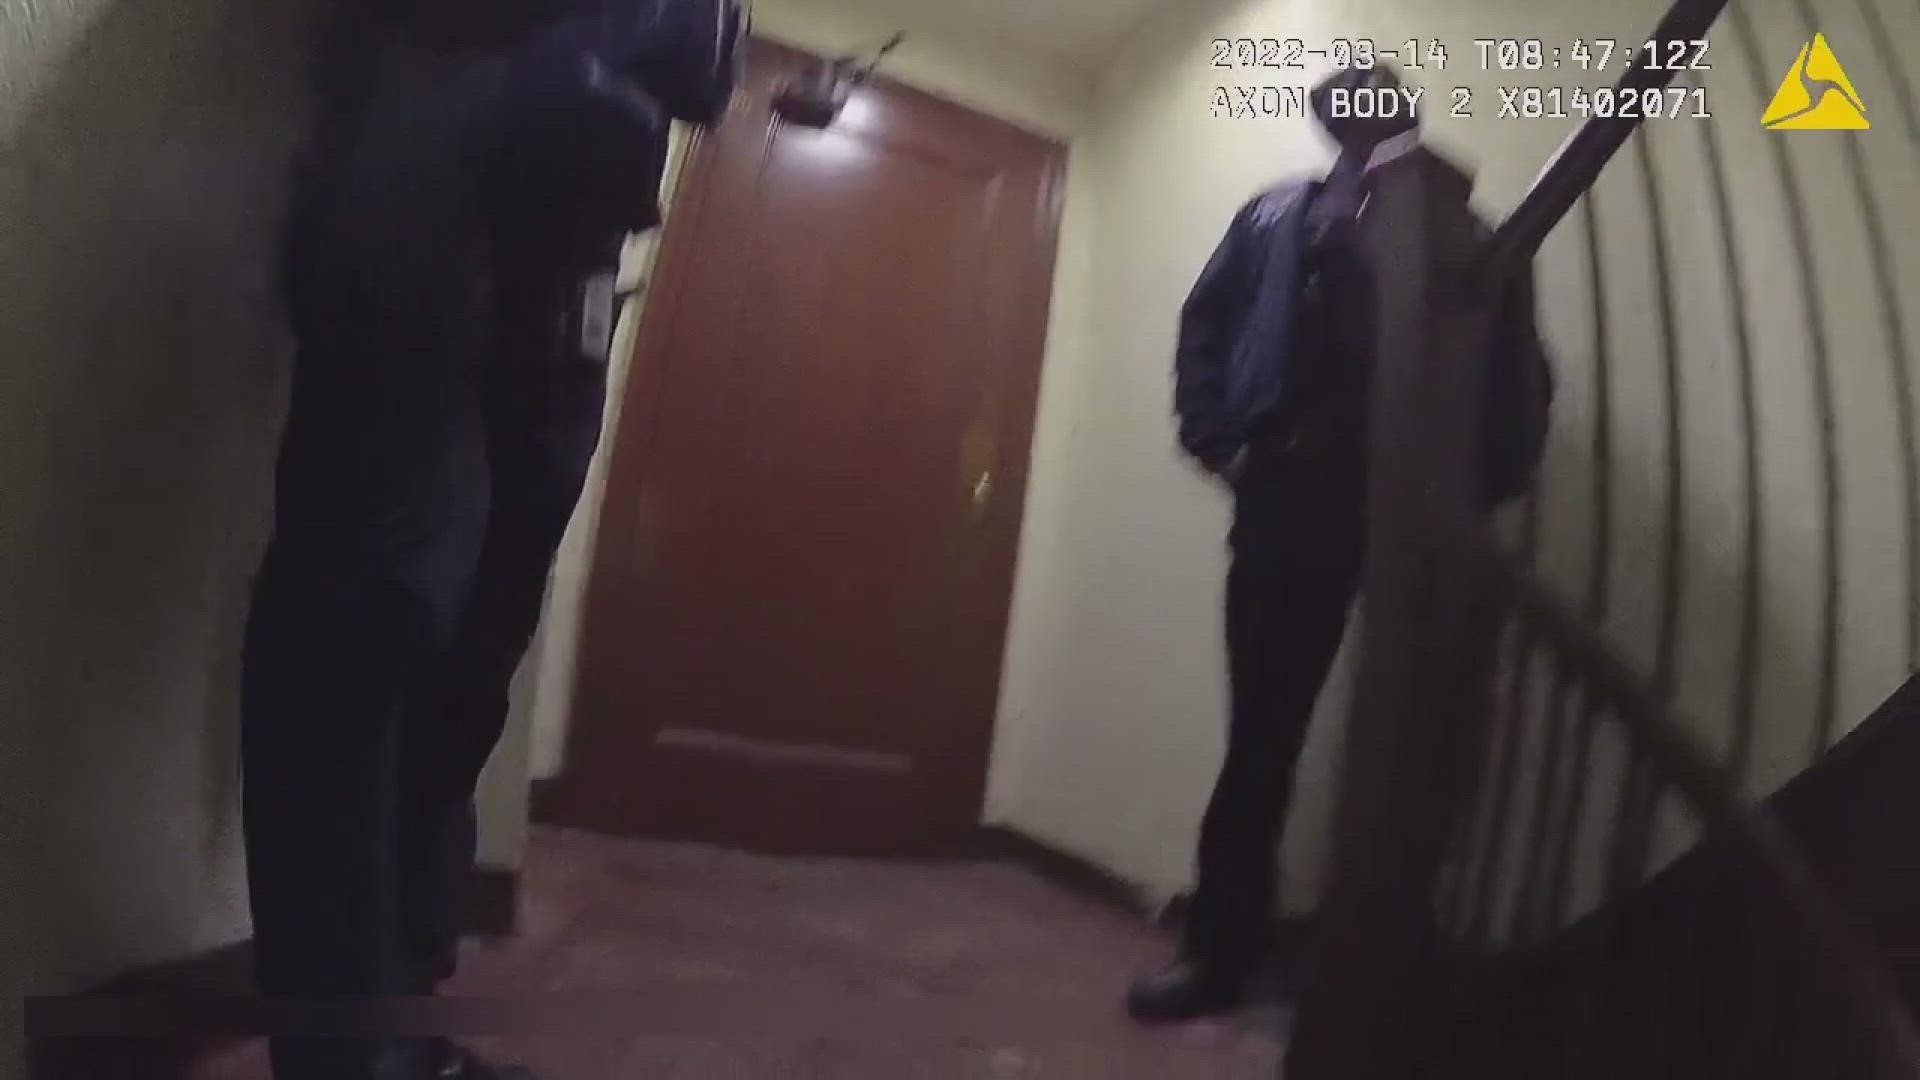 Buffalo Police release body cam footage from Hertel Avenue officer-involved shooting